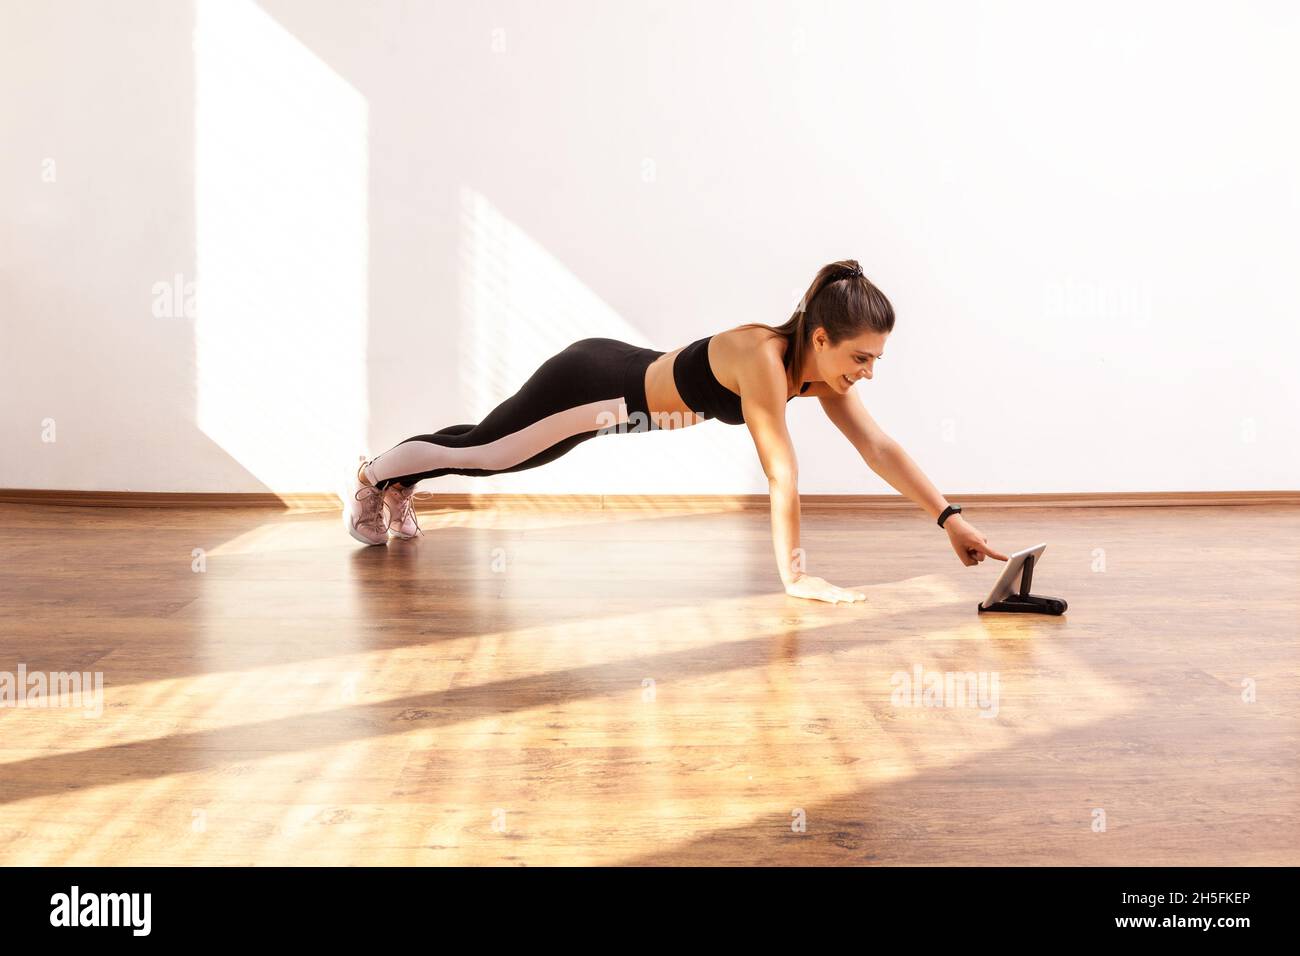 Slim woman doing plank exercise, repeat after coach online, choosing next tutorial video on tablet, wearing black sports top and tights. Full length studio shot illuminated by sunlight from window. Stock Photo